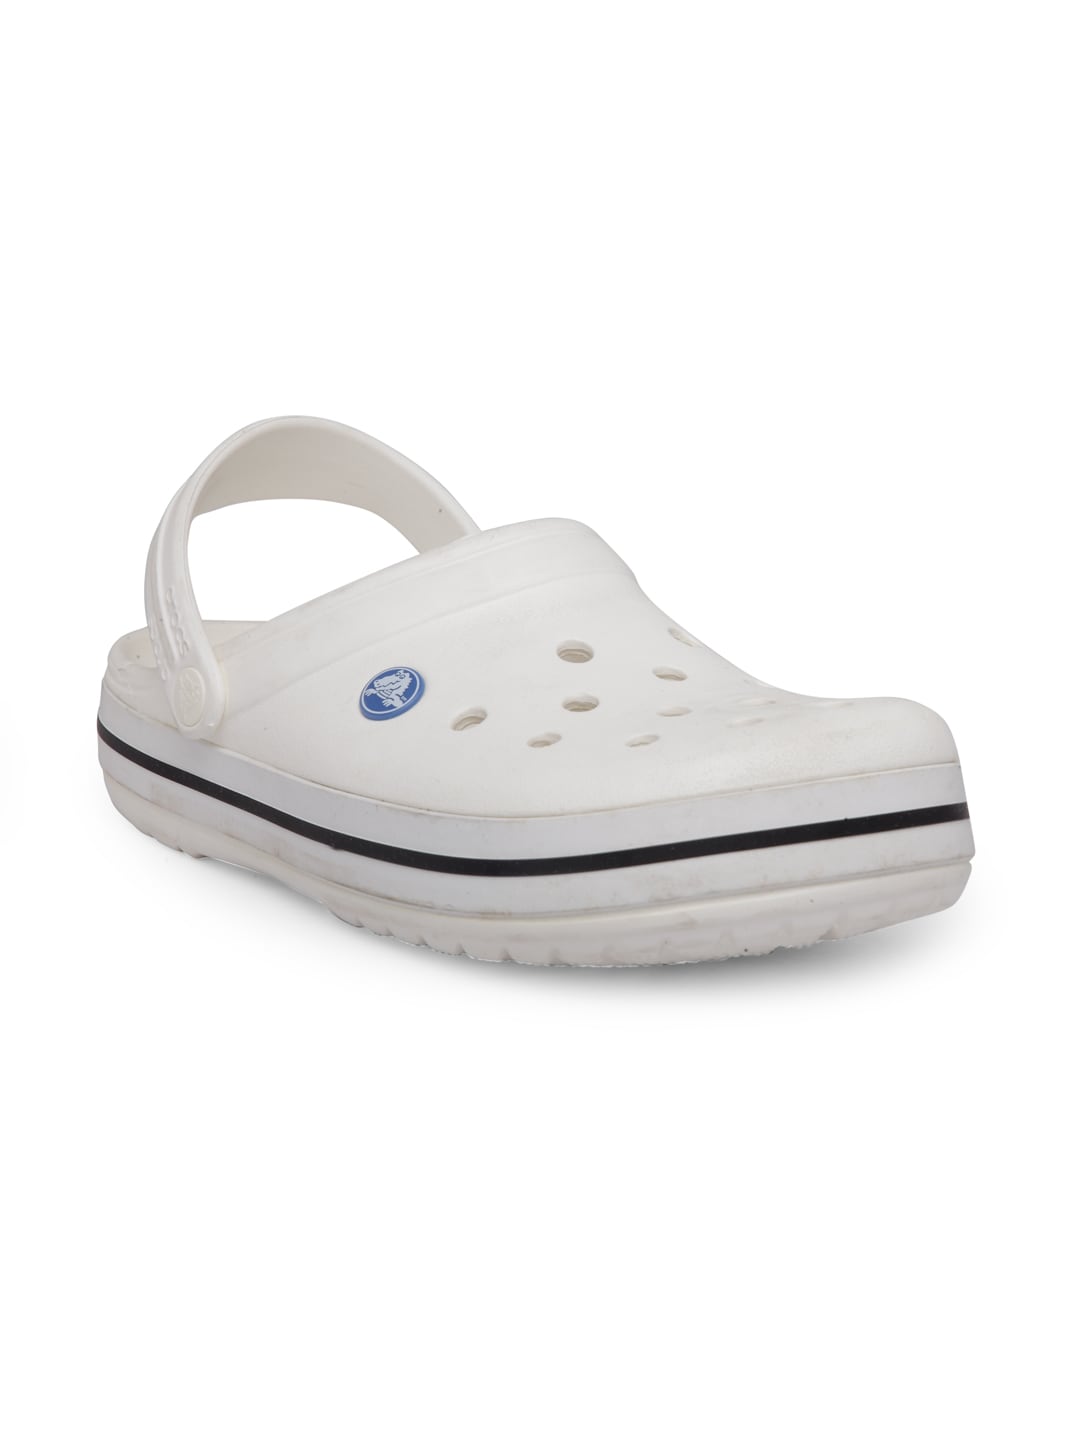 Crocs Crocband Unisex White Solid Clogs Price in India